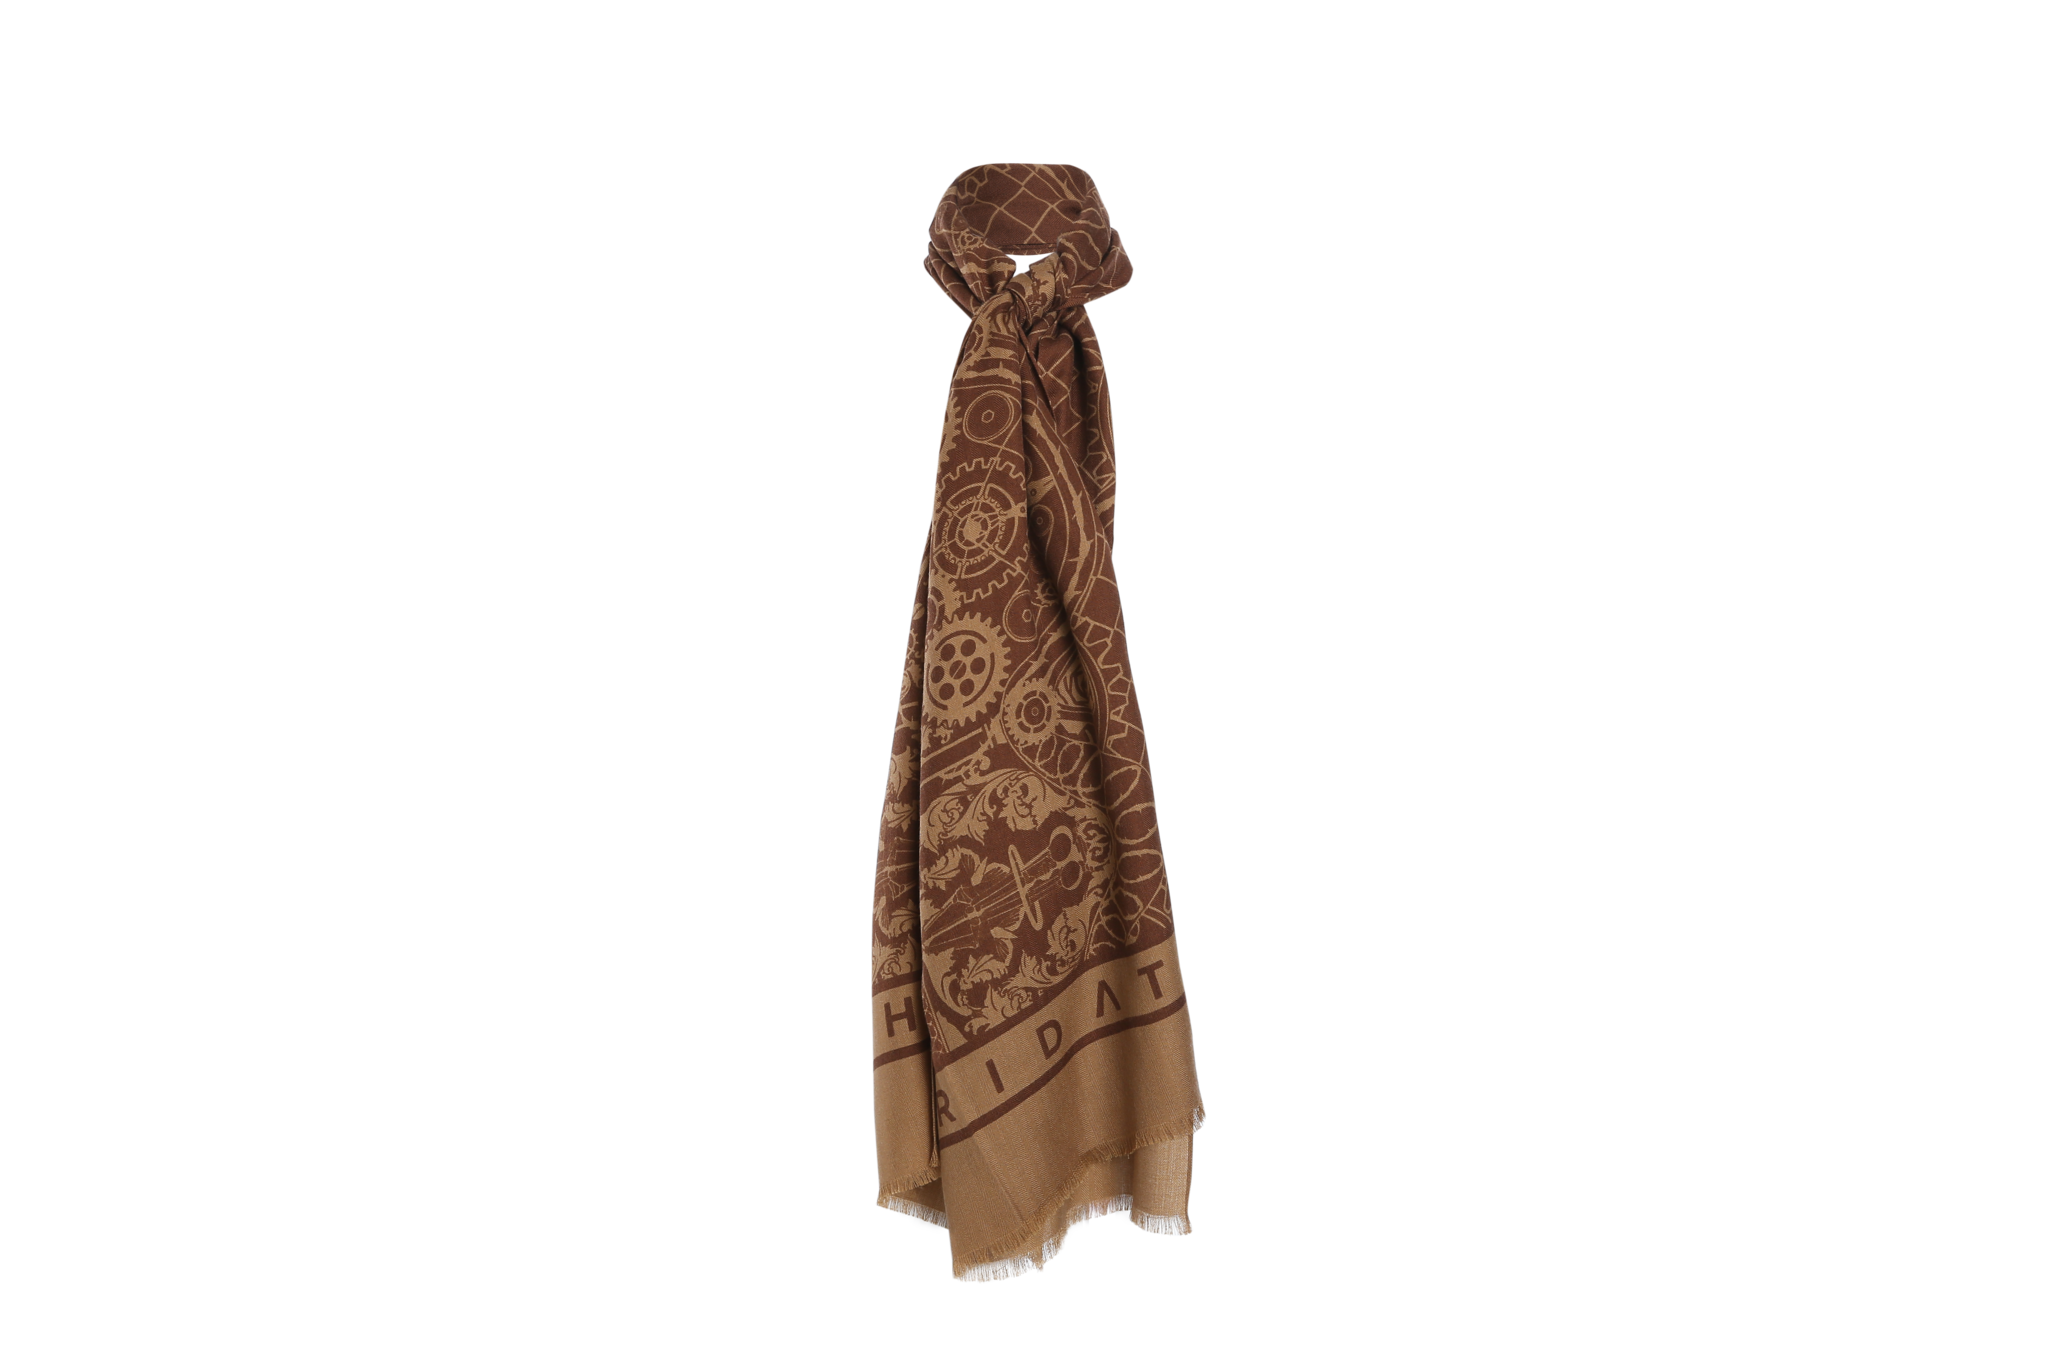 Copy of Wheel Graphic Brown Cashmere Scarf